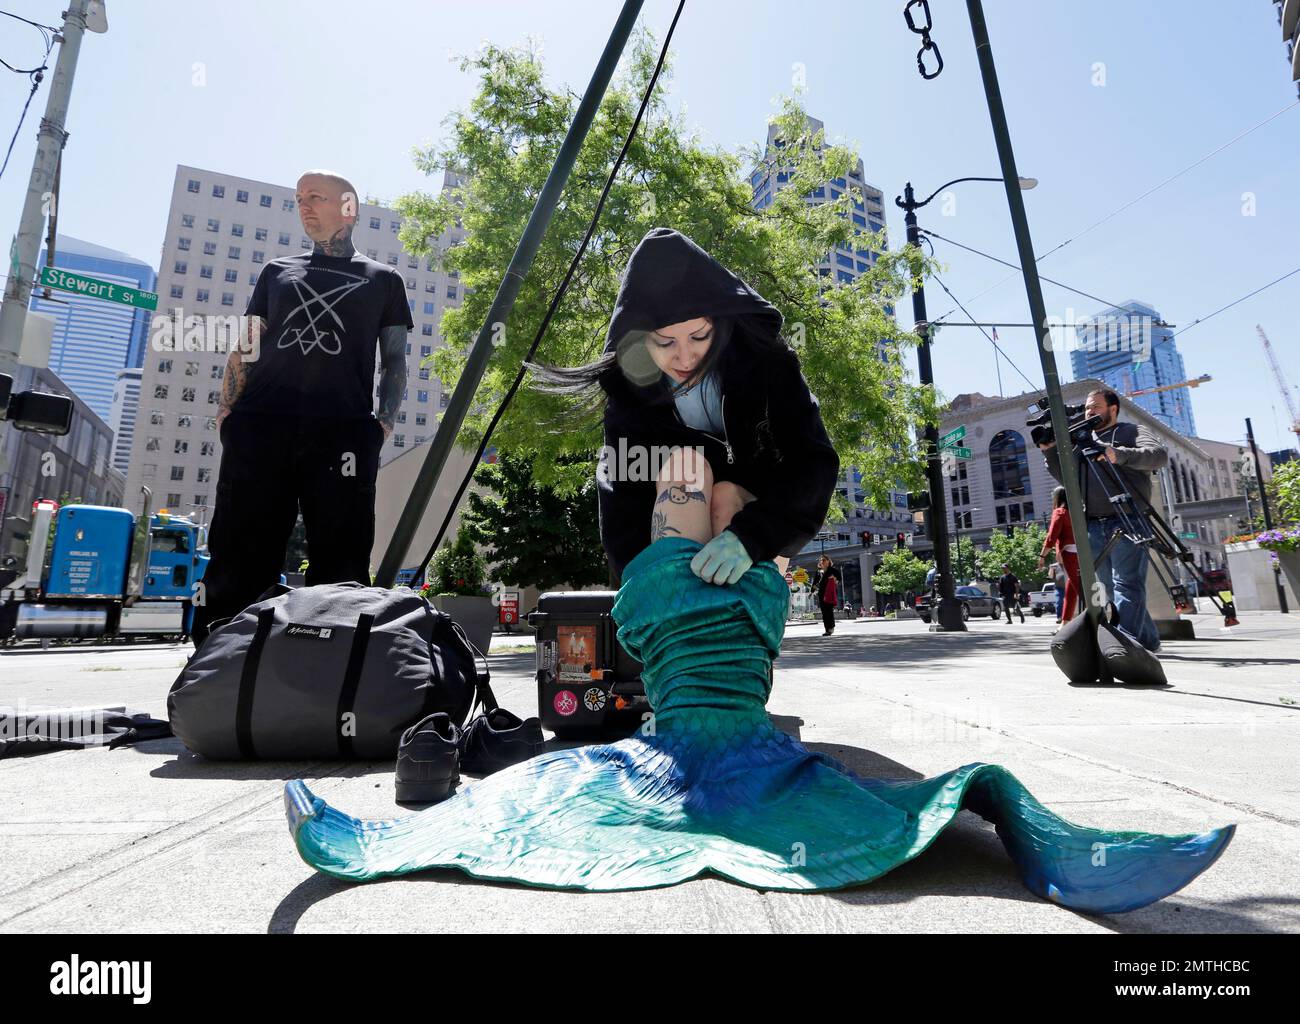 Victoria Lemeow pulls on a mermaid costume before having hooks embedded  into her back and being dangled from the trip above her as a protest  against fishing Monday, June 5, 2017, in